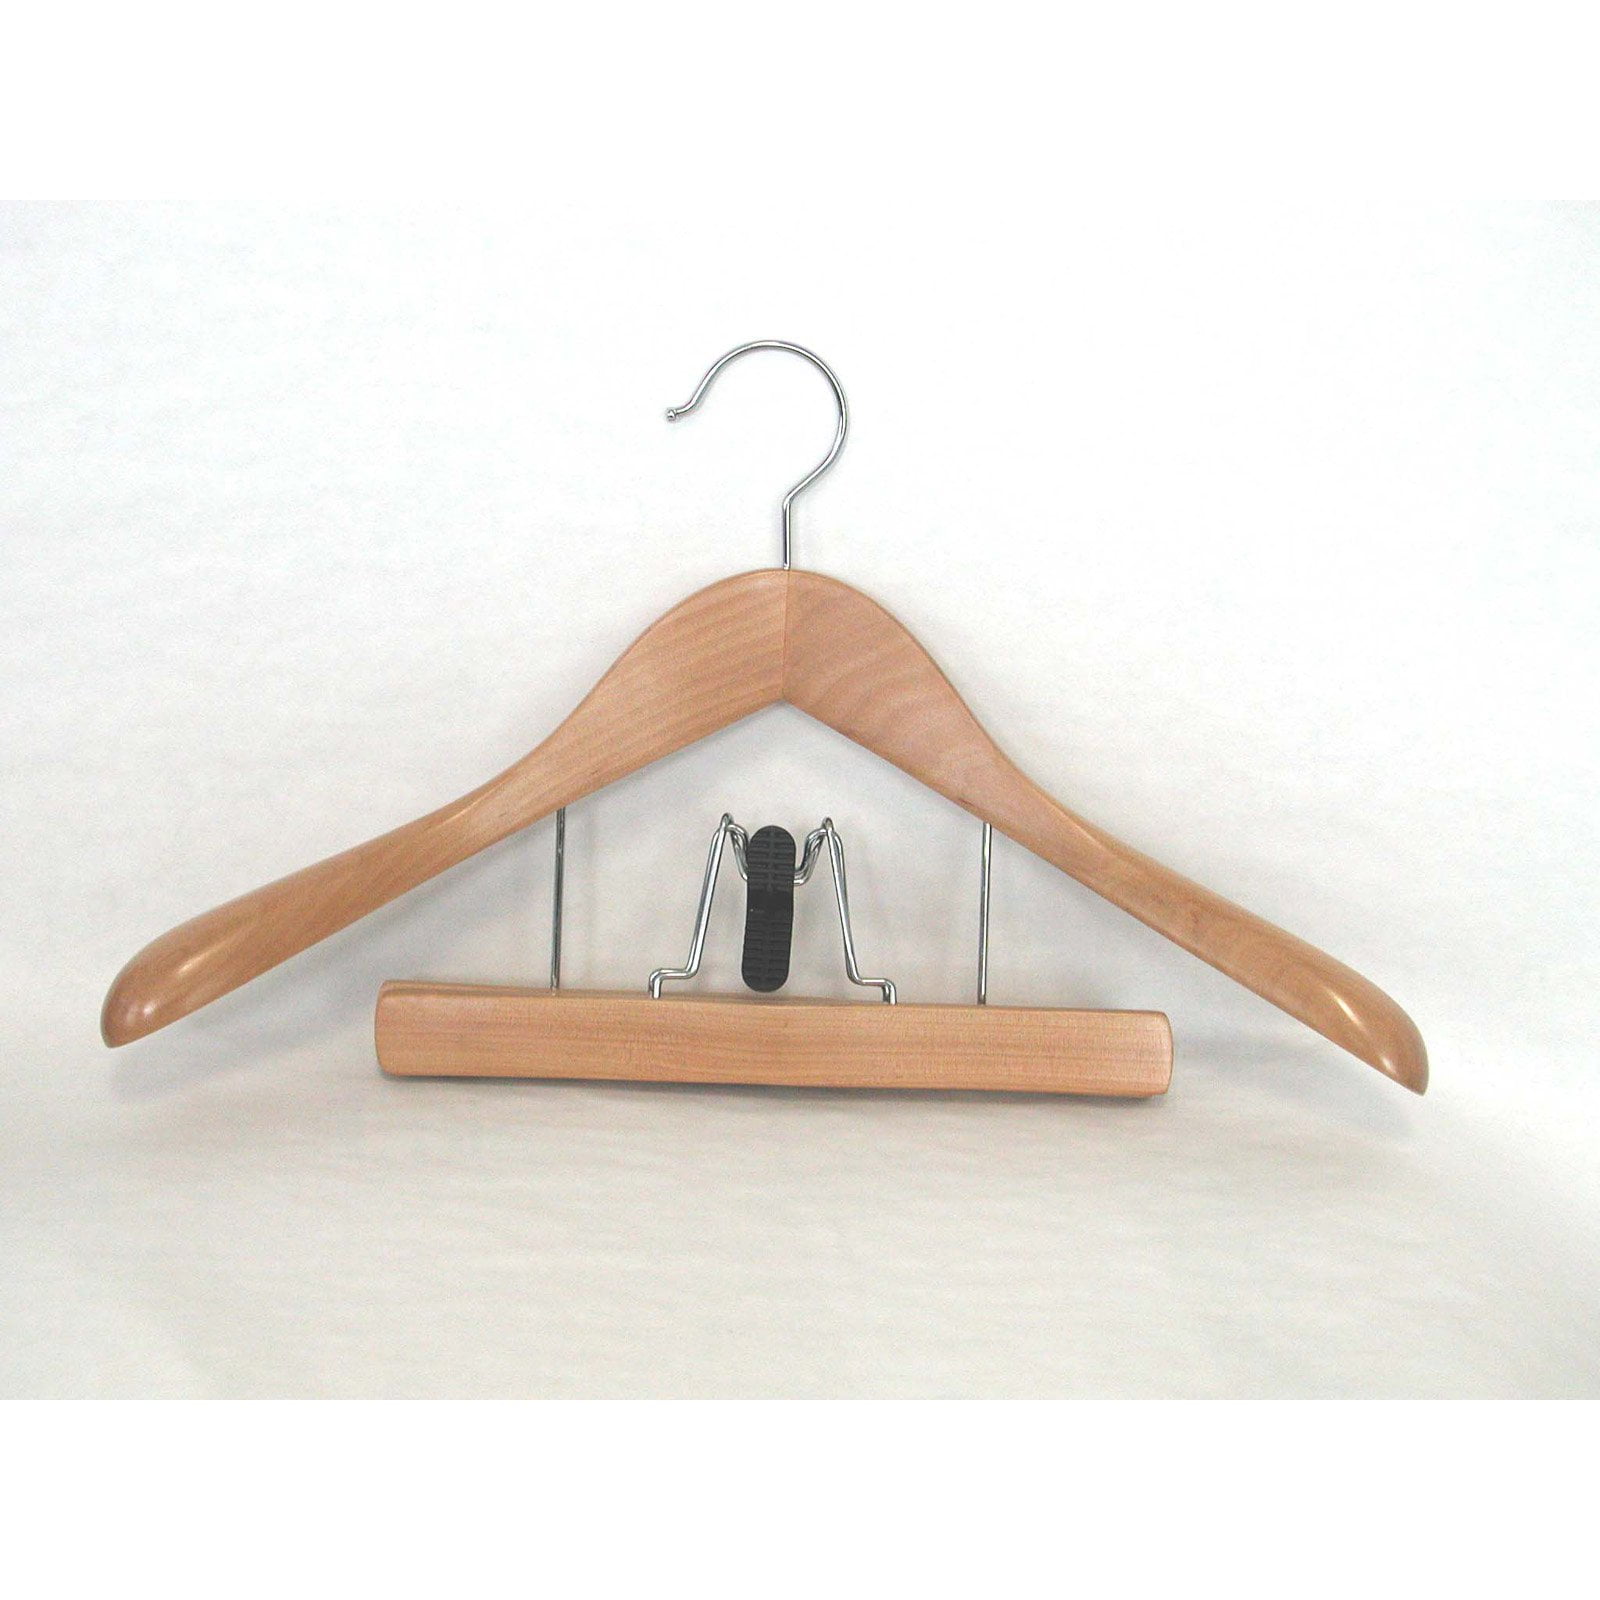 Euro Walnut Wood Suit Hanger with Pant Clamp